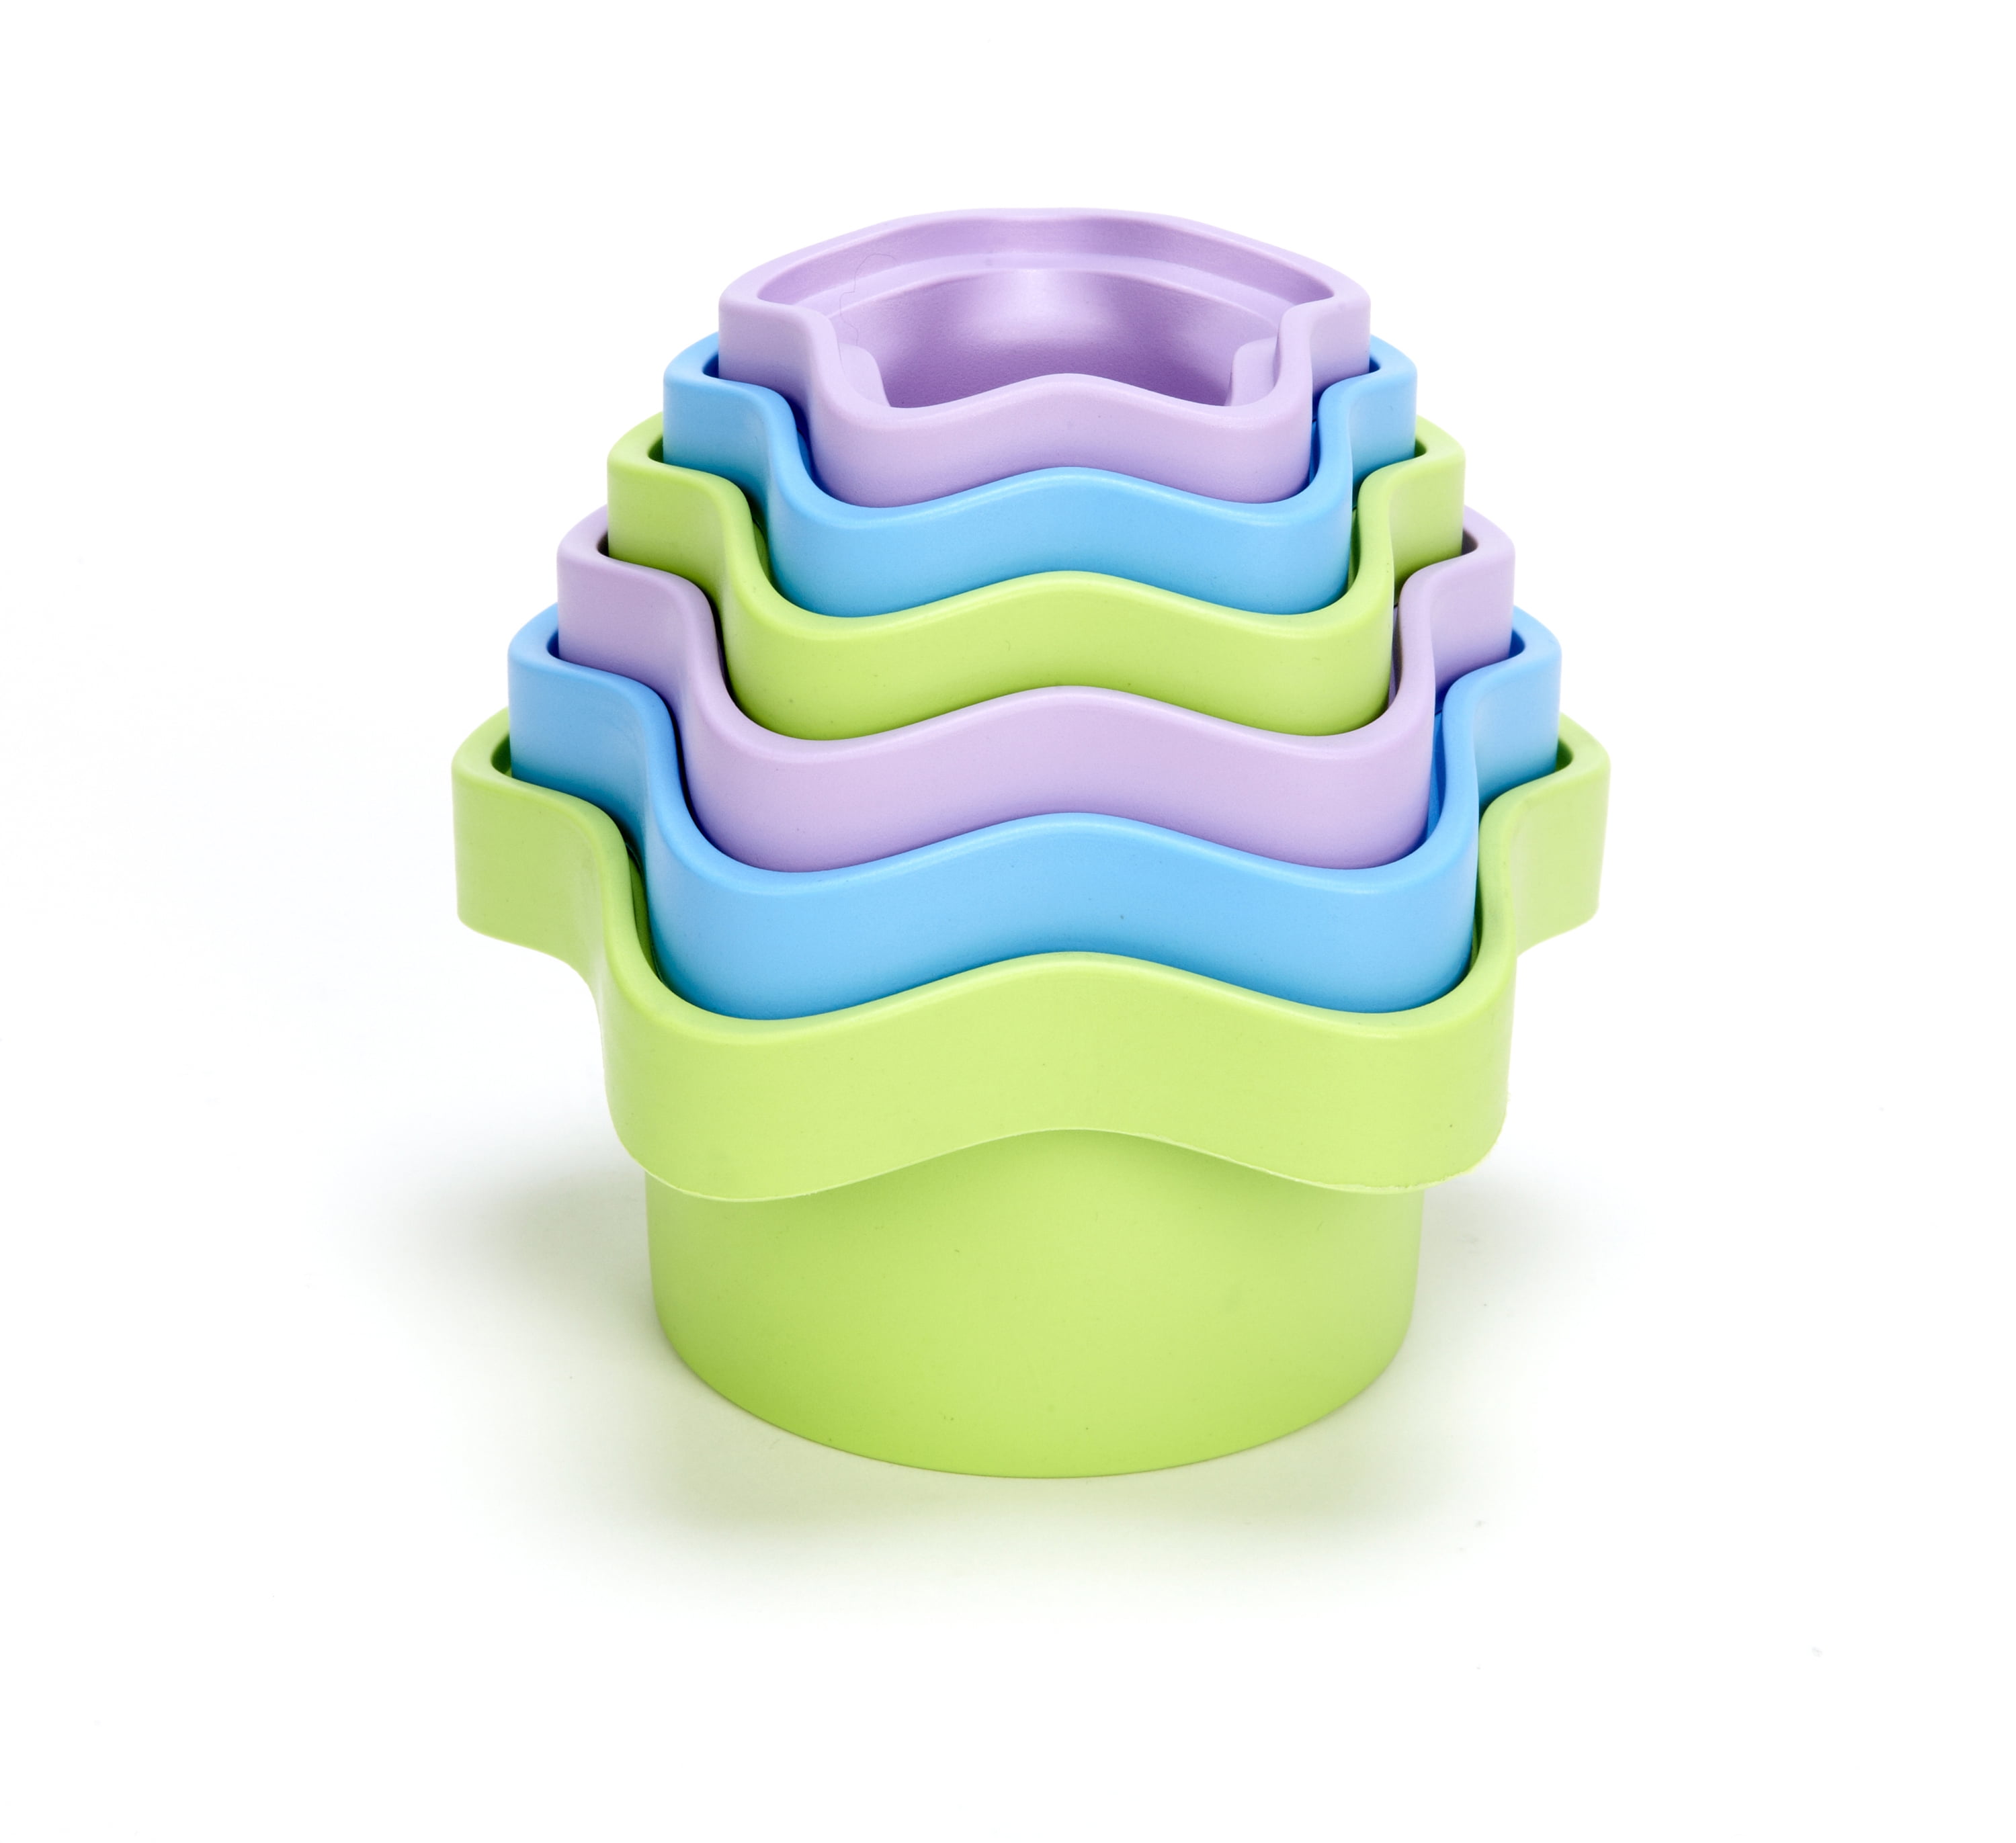 Small Fish Stacking Bath Cups for Toddlers, Rainbow Infant Nesting Cups for 1-3 Years Old, Baby Stack Cups with Sea Animal Shapes and Drain Holes for